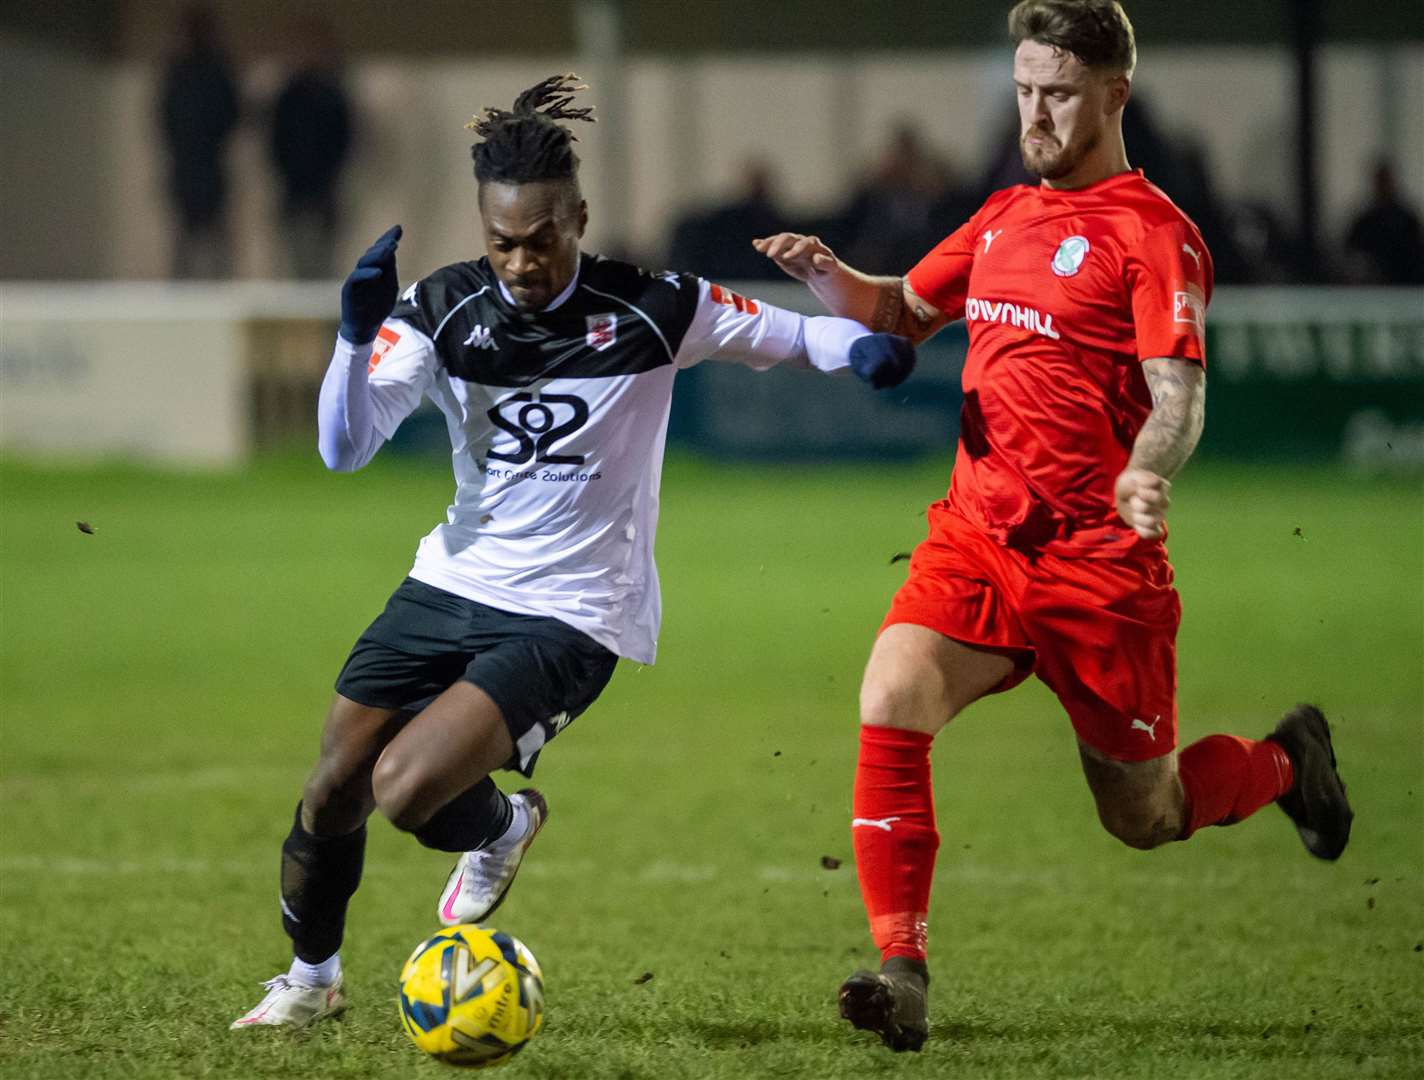 Faversham’s Toby Ajala tries to get by an away player. Picture: Ian Scammell